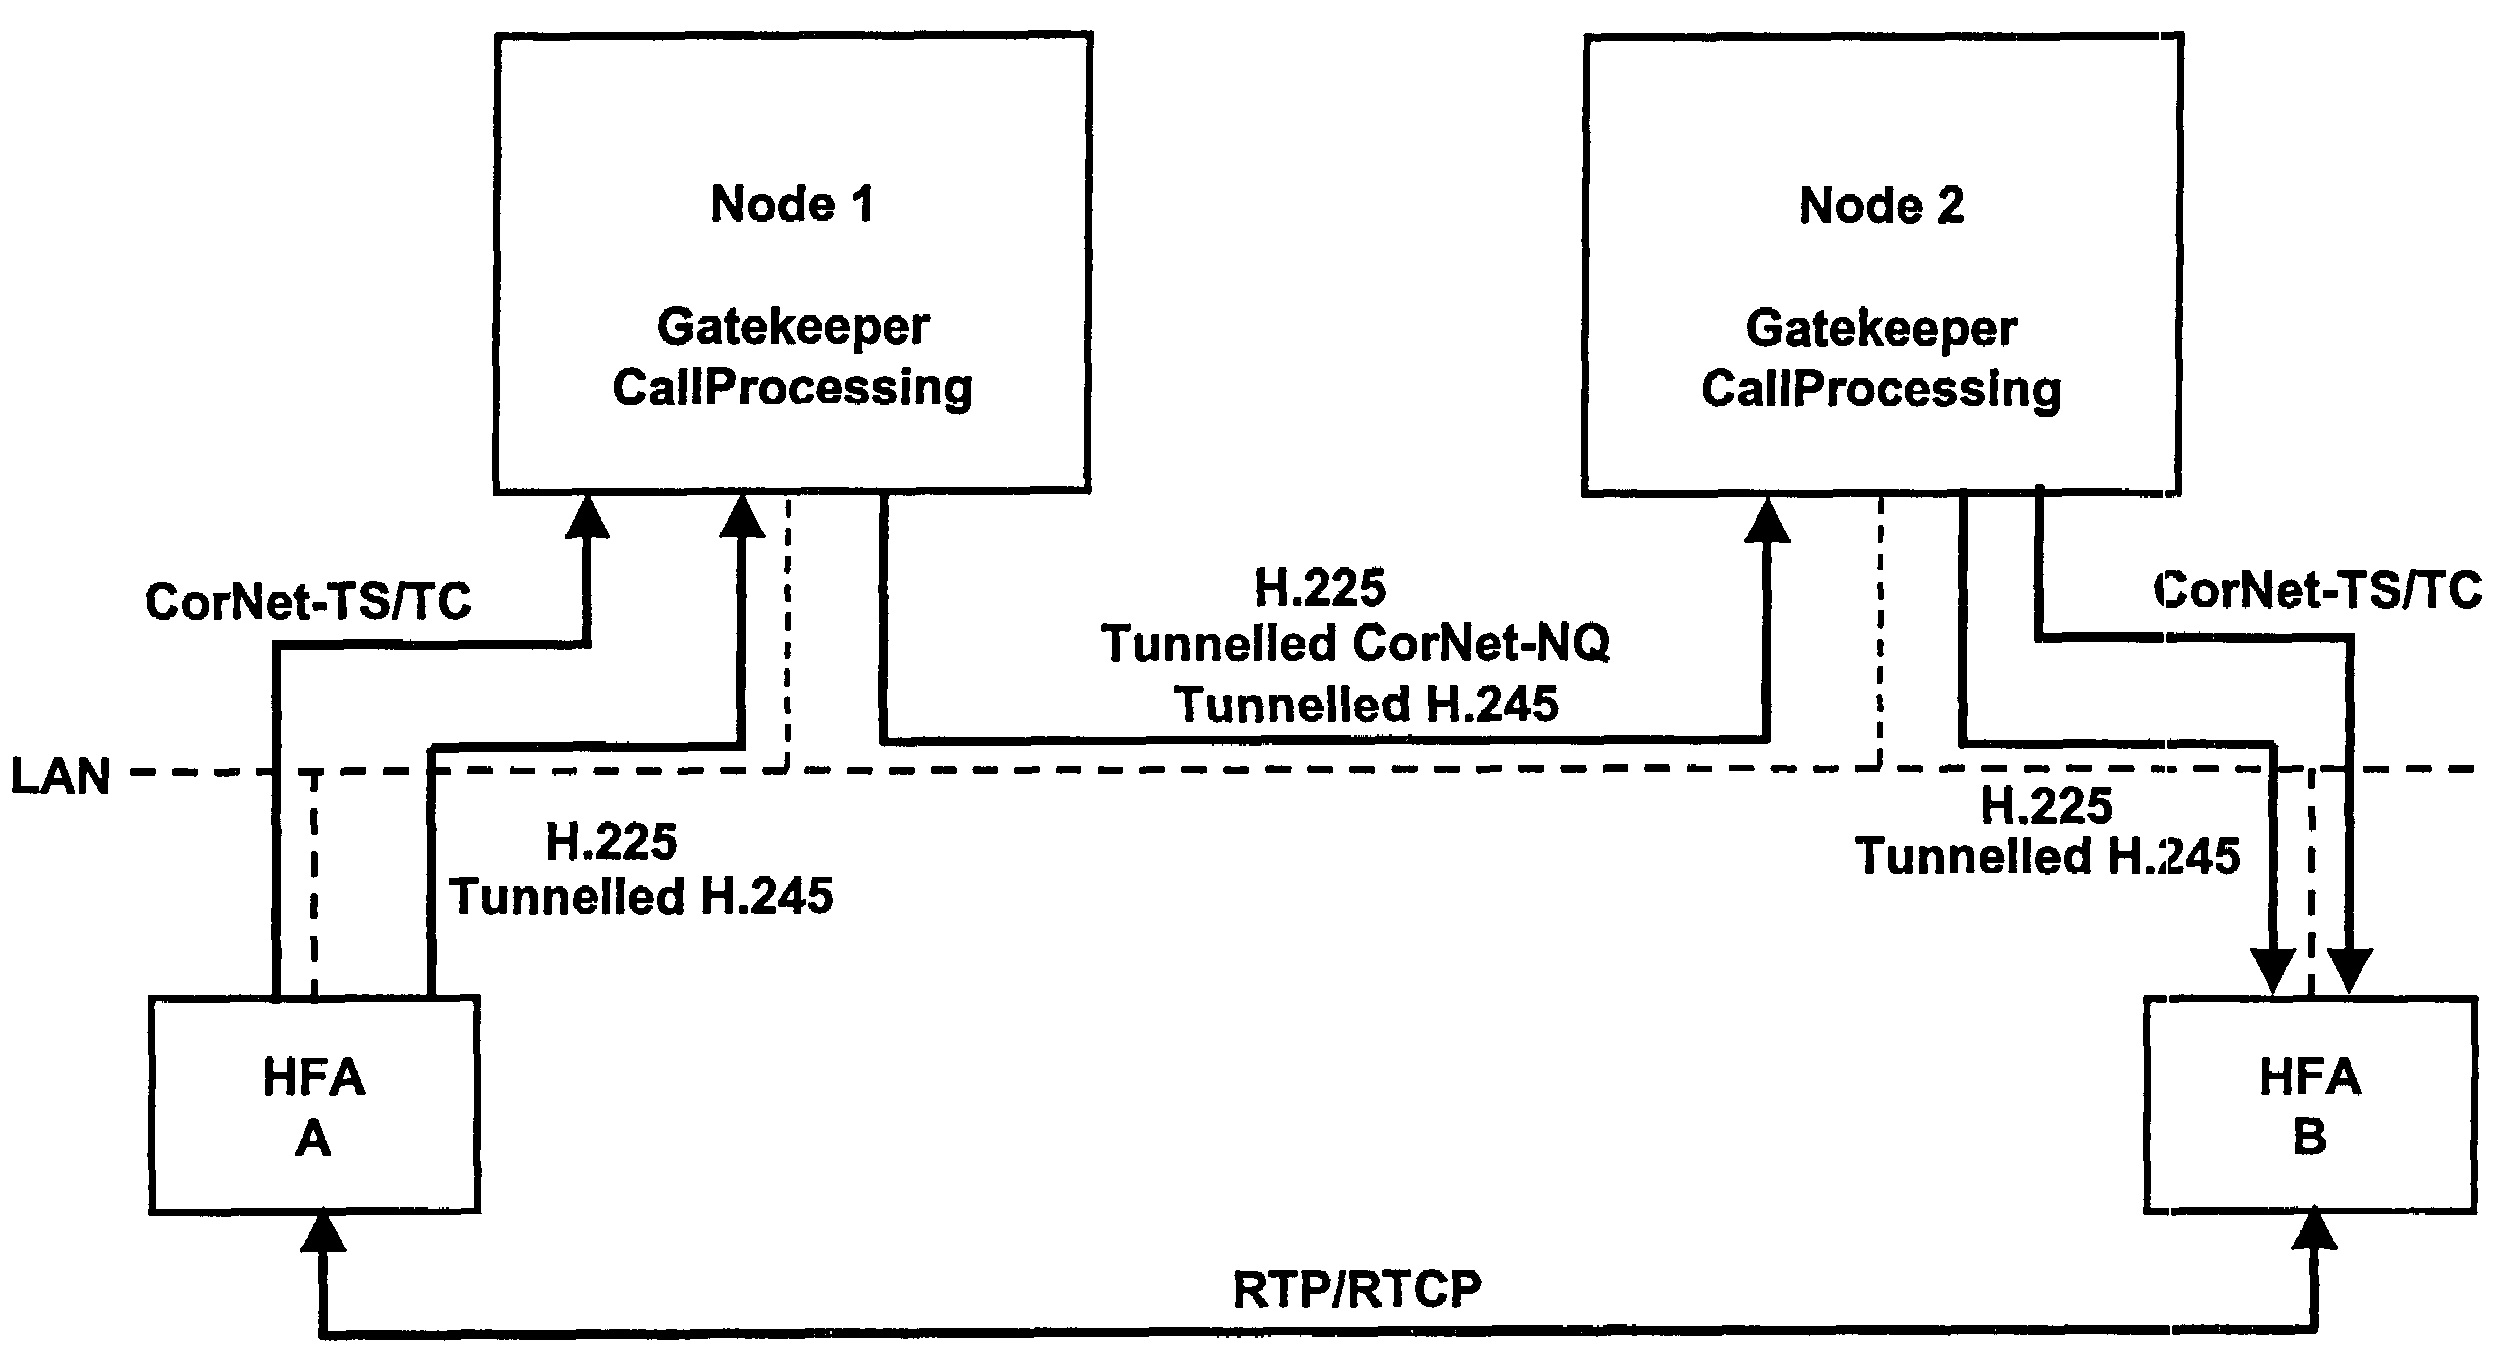 Method for setting up a useful data link between terminals in a VoIP system